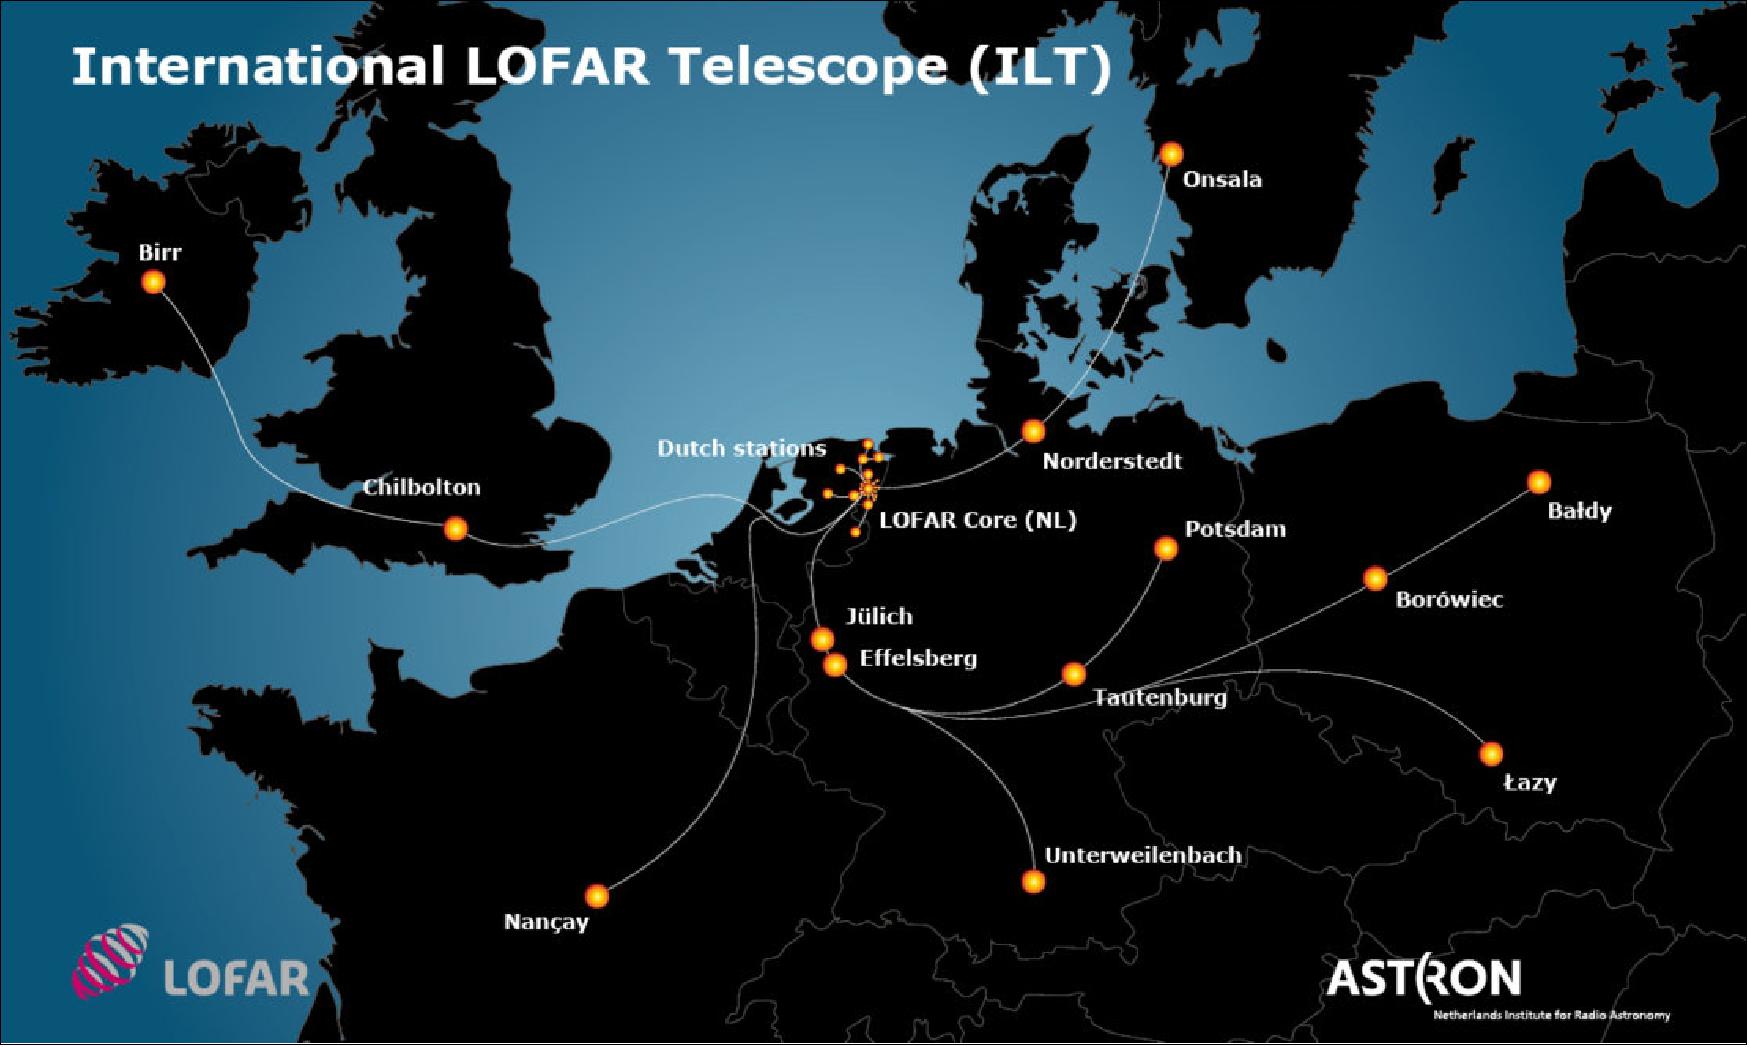 Figure 4: Locations of the International LOFAR Telescope for radio astronomy. The Lofar, operated by the Astron Netherlands Institute for Radio Astronomy, consists of 51 antenna stations from Sweden to Ireland and Poland tasked with studying some of the lowest frequencies that can be observed from Earth, probing the primordial era before stars and galaxies were formed (image credit: LOFAR/Astron)